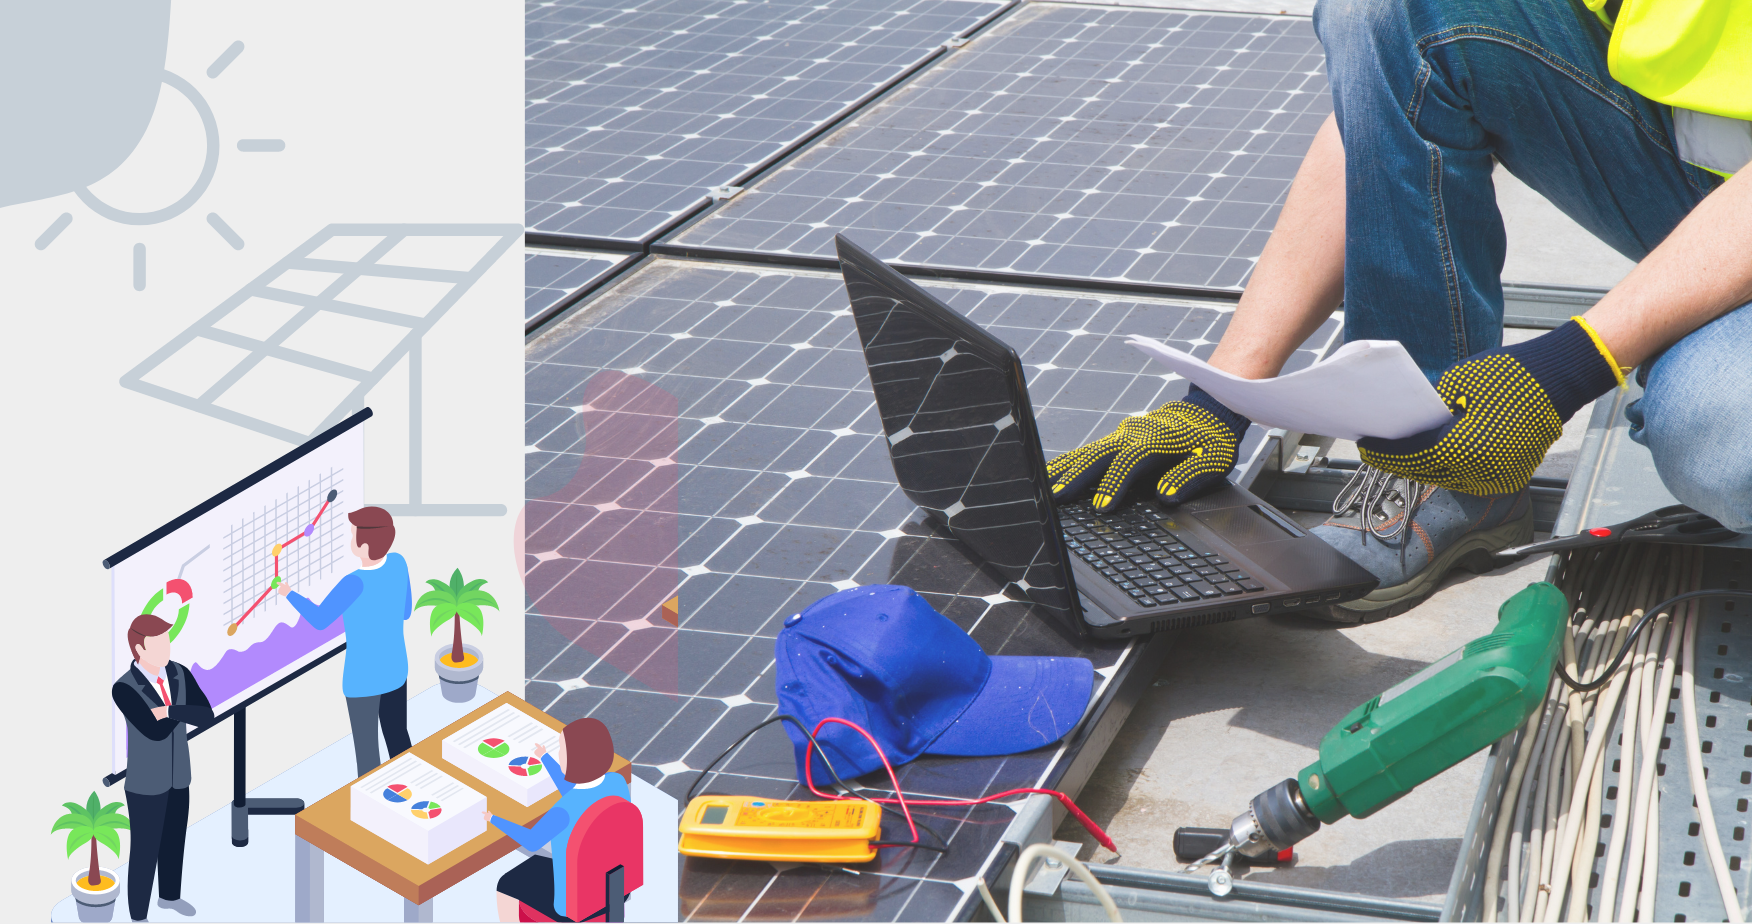 Audit advice and due diligence of photovoltaic solar parks